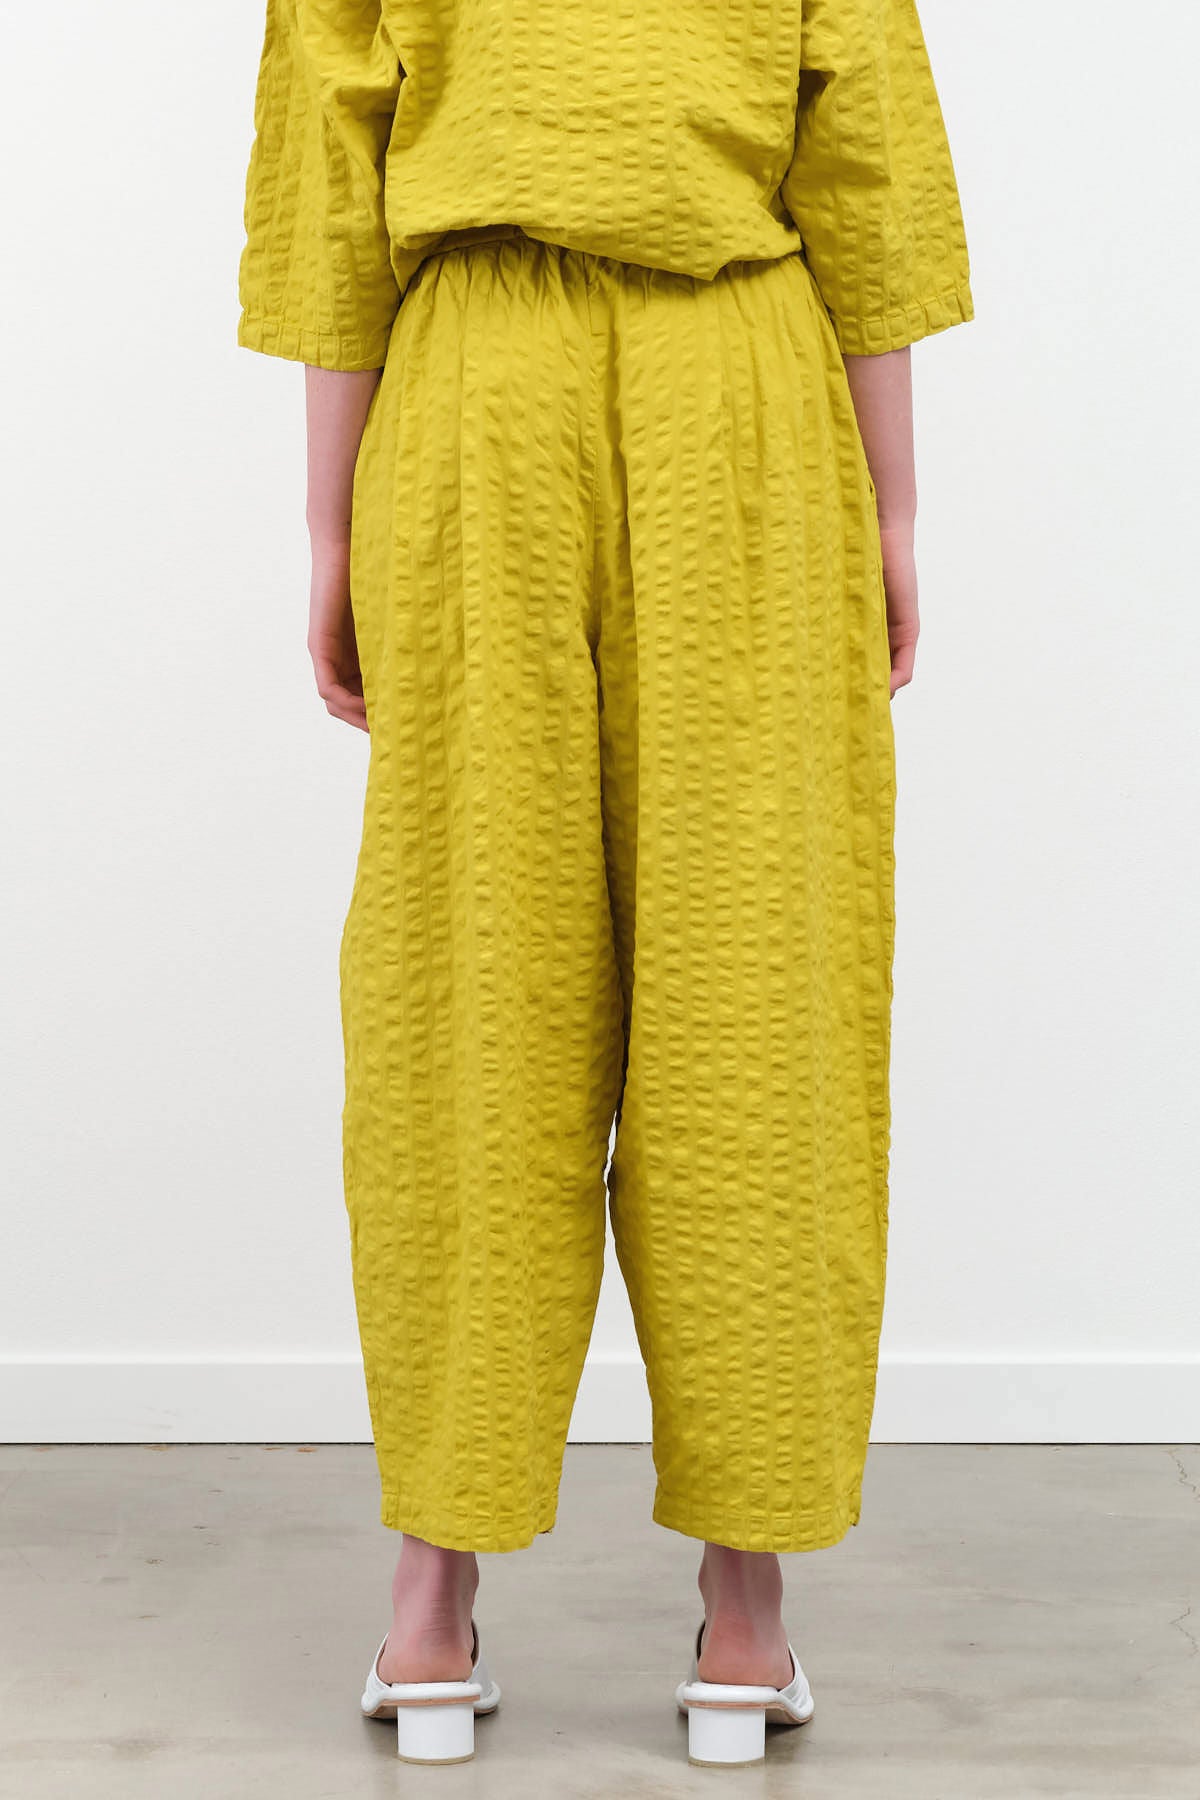 Back view of Wide Pants in Turmeric